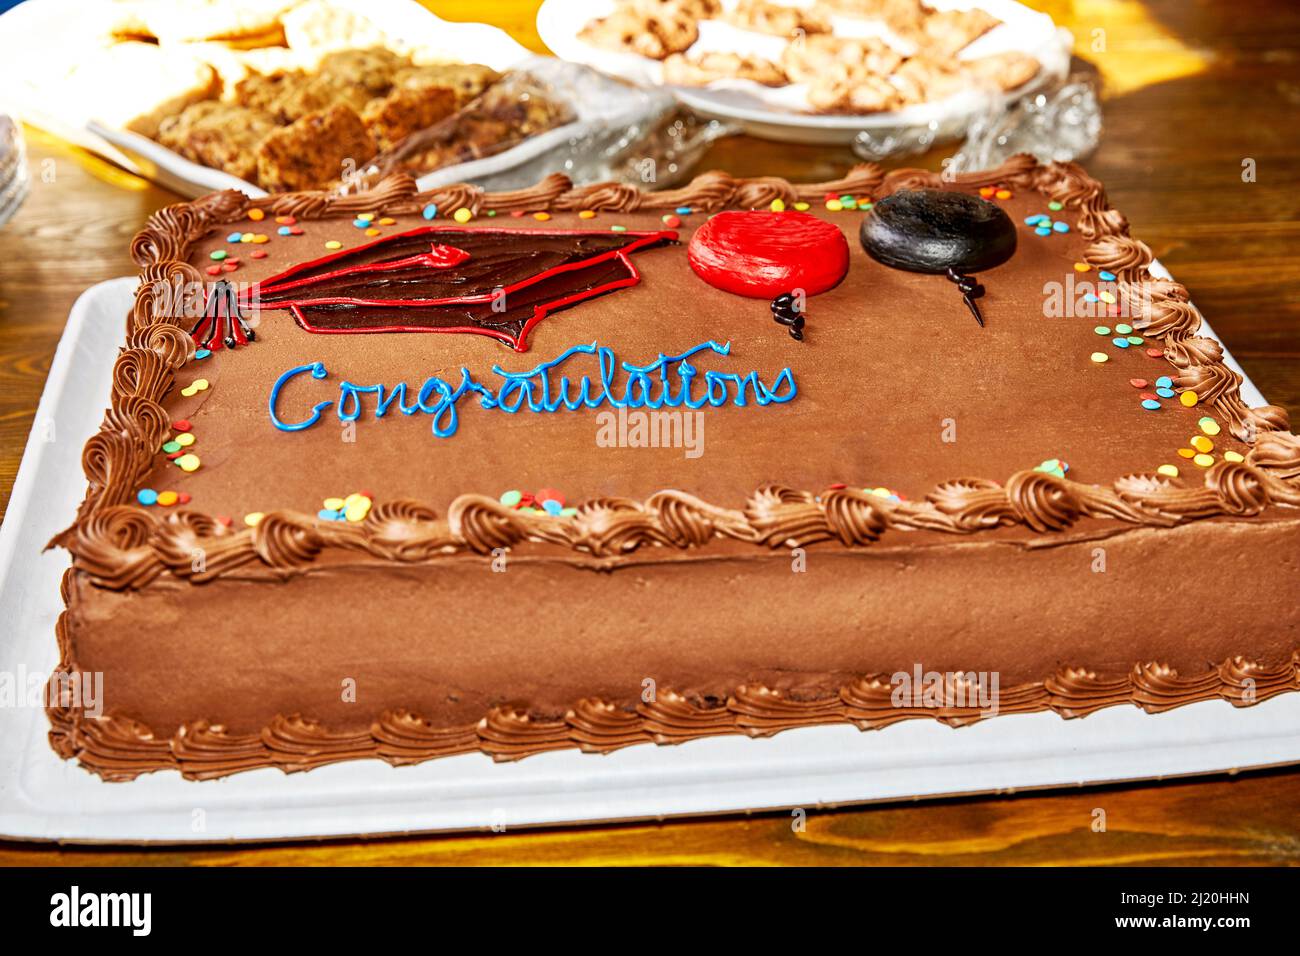 Chocolate graduation cake with decorations and cookies in the background with shallow depth of field Stock Photo